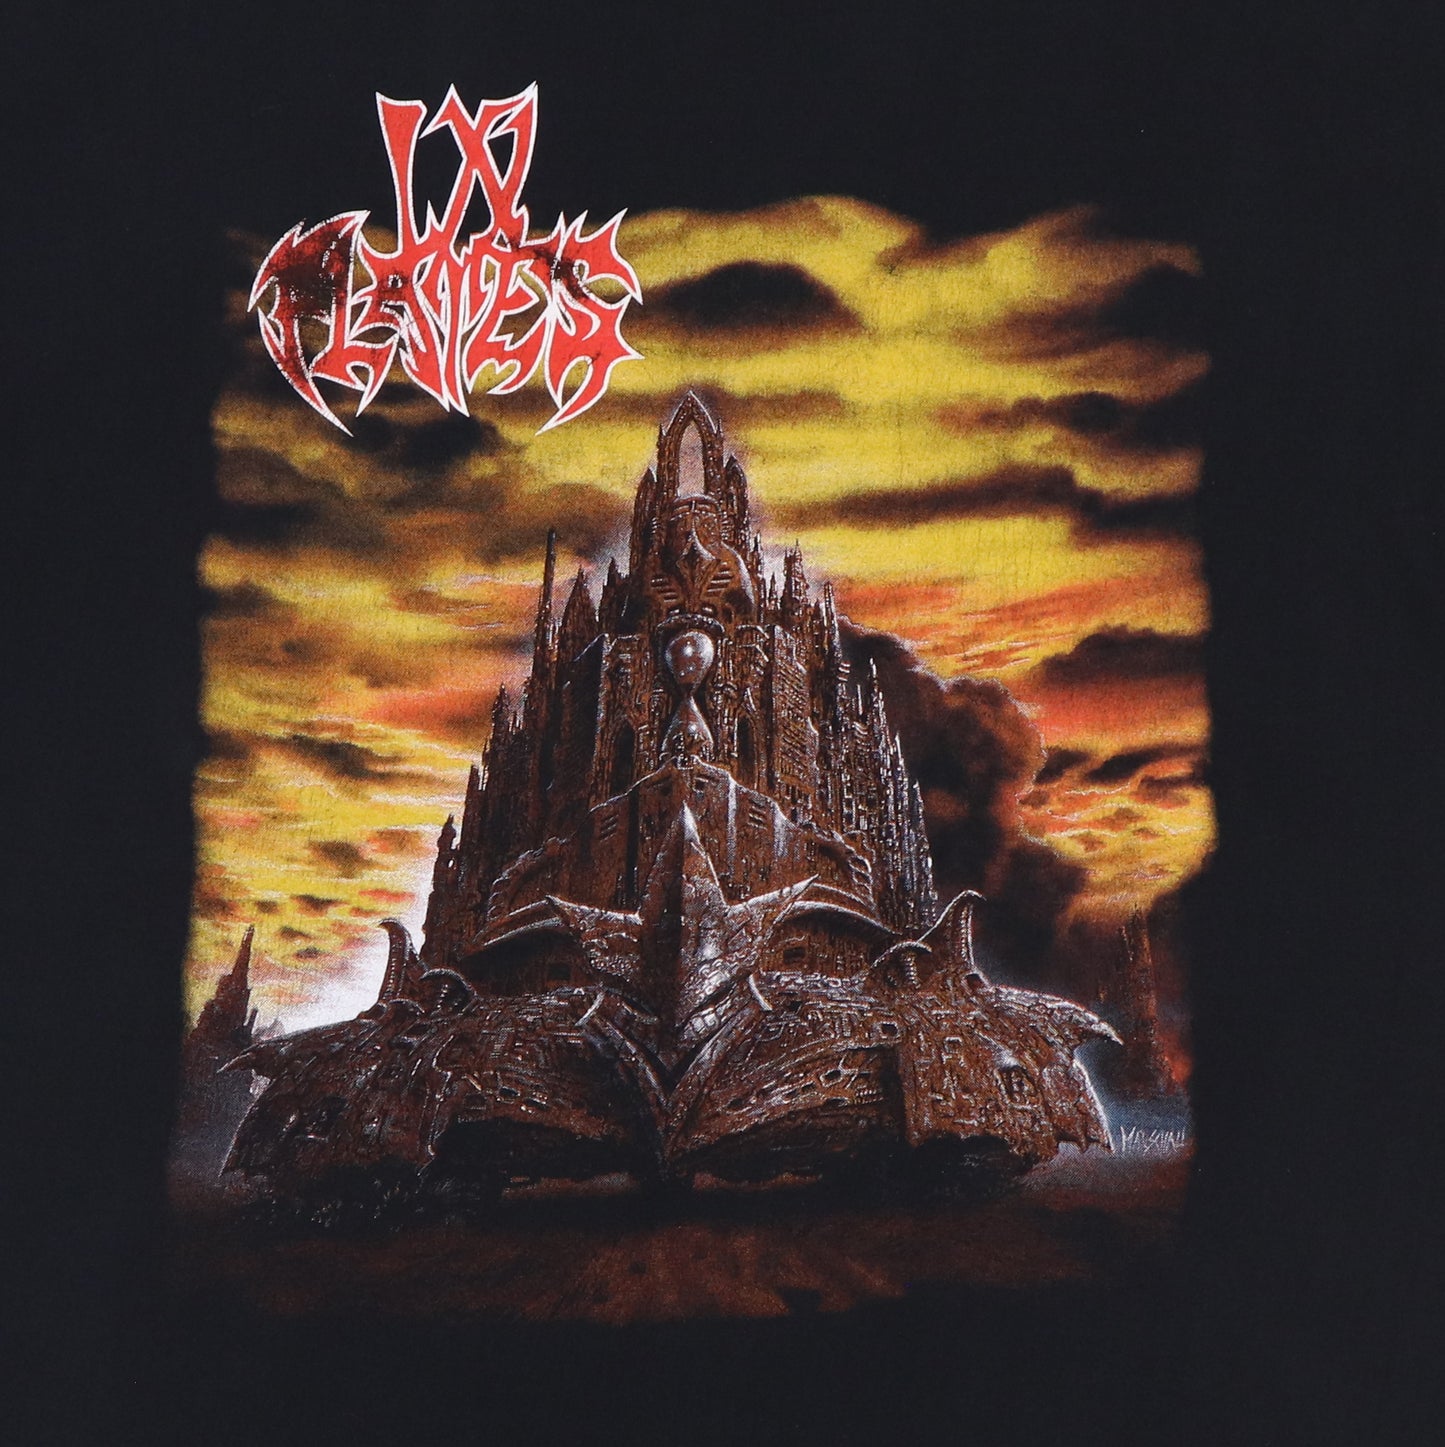 1996 In Flames The Jester Race Shirt